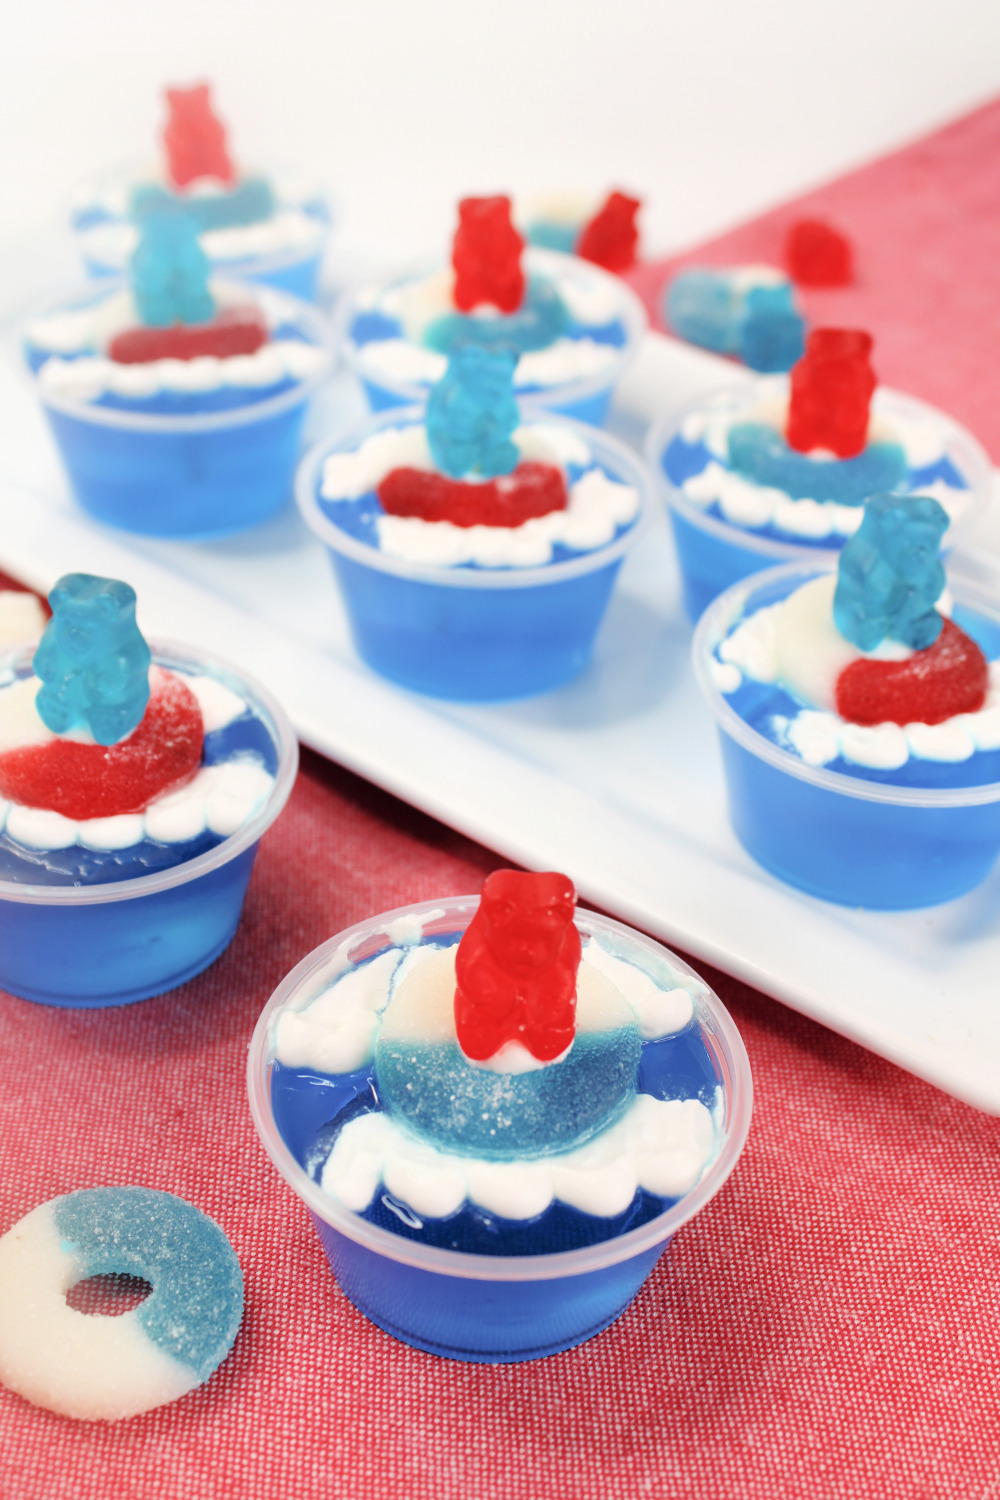 Fun beach party jello shots using gummy bears in red, white and blue!